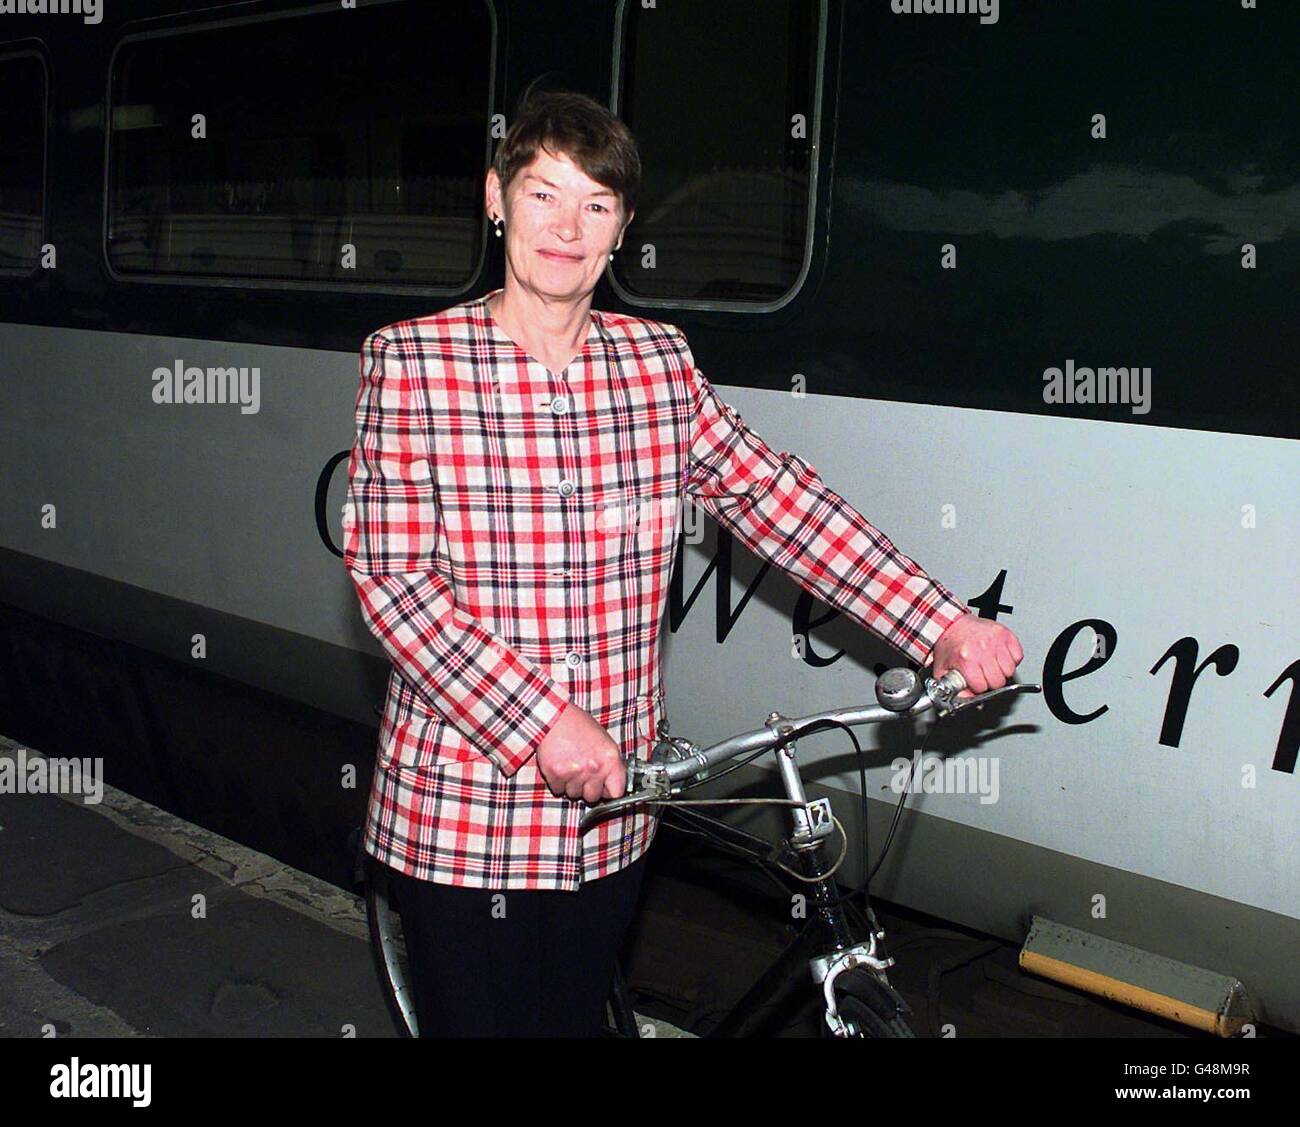 Transport Minister Glenda Jackson at Paddington station this morning (Wednesday) where she reviewed new arrangements for bicycle travel on the Great Western train group.Photo by Neil Munns/PA*EDI* Stock Photo